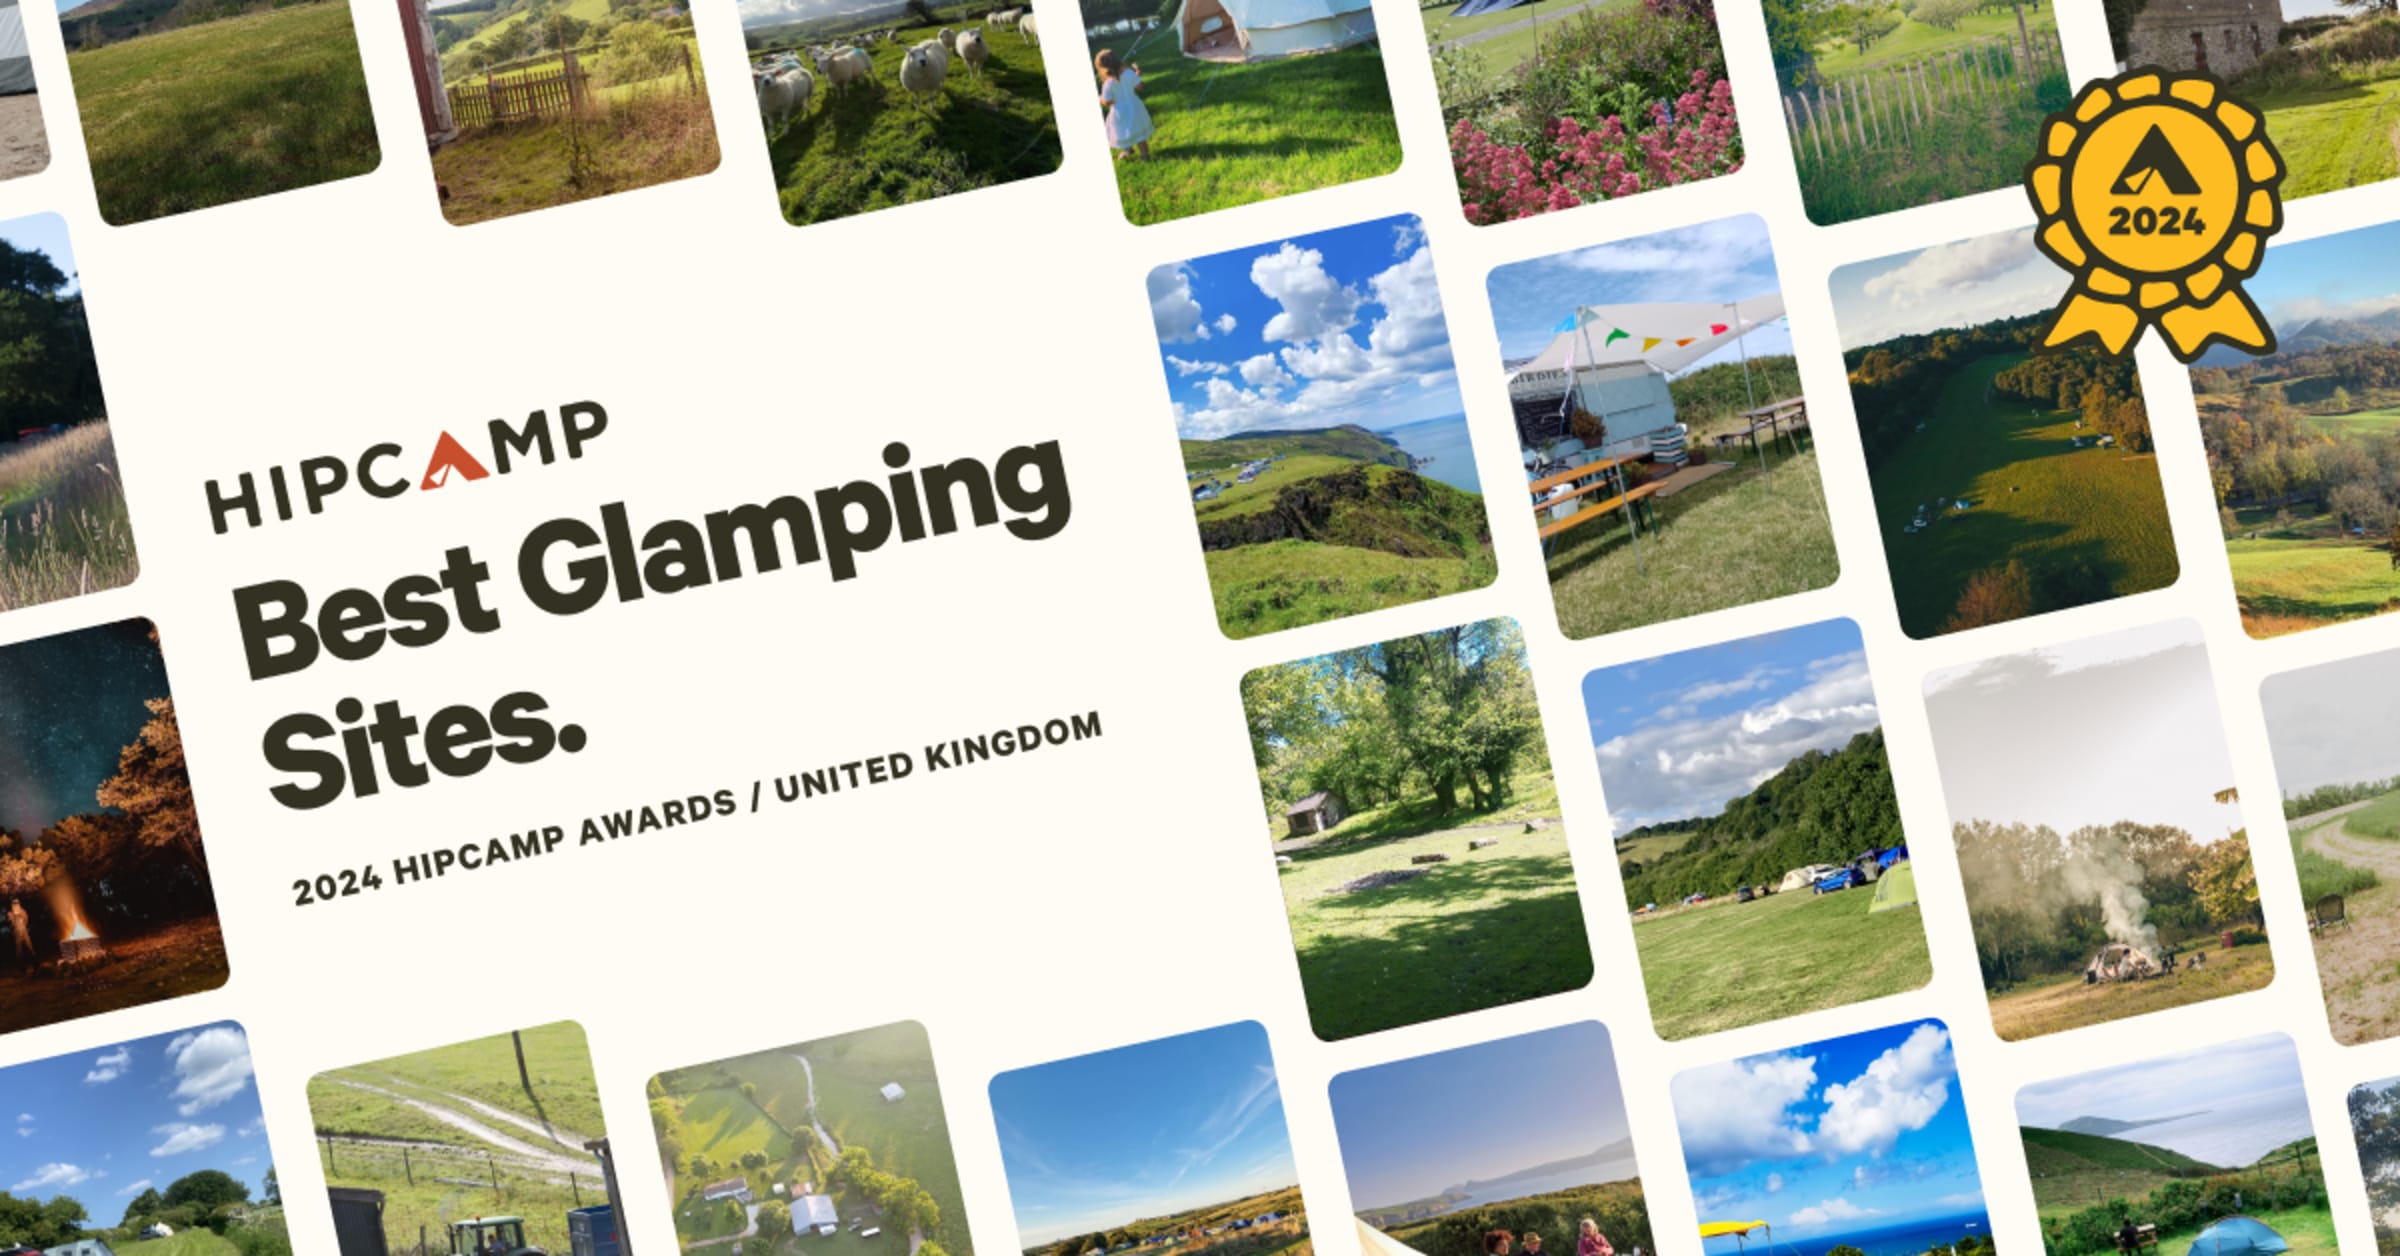 Hipcamp Awards 2024: Best Glamping Sites in the UK